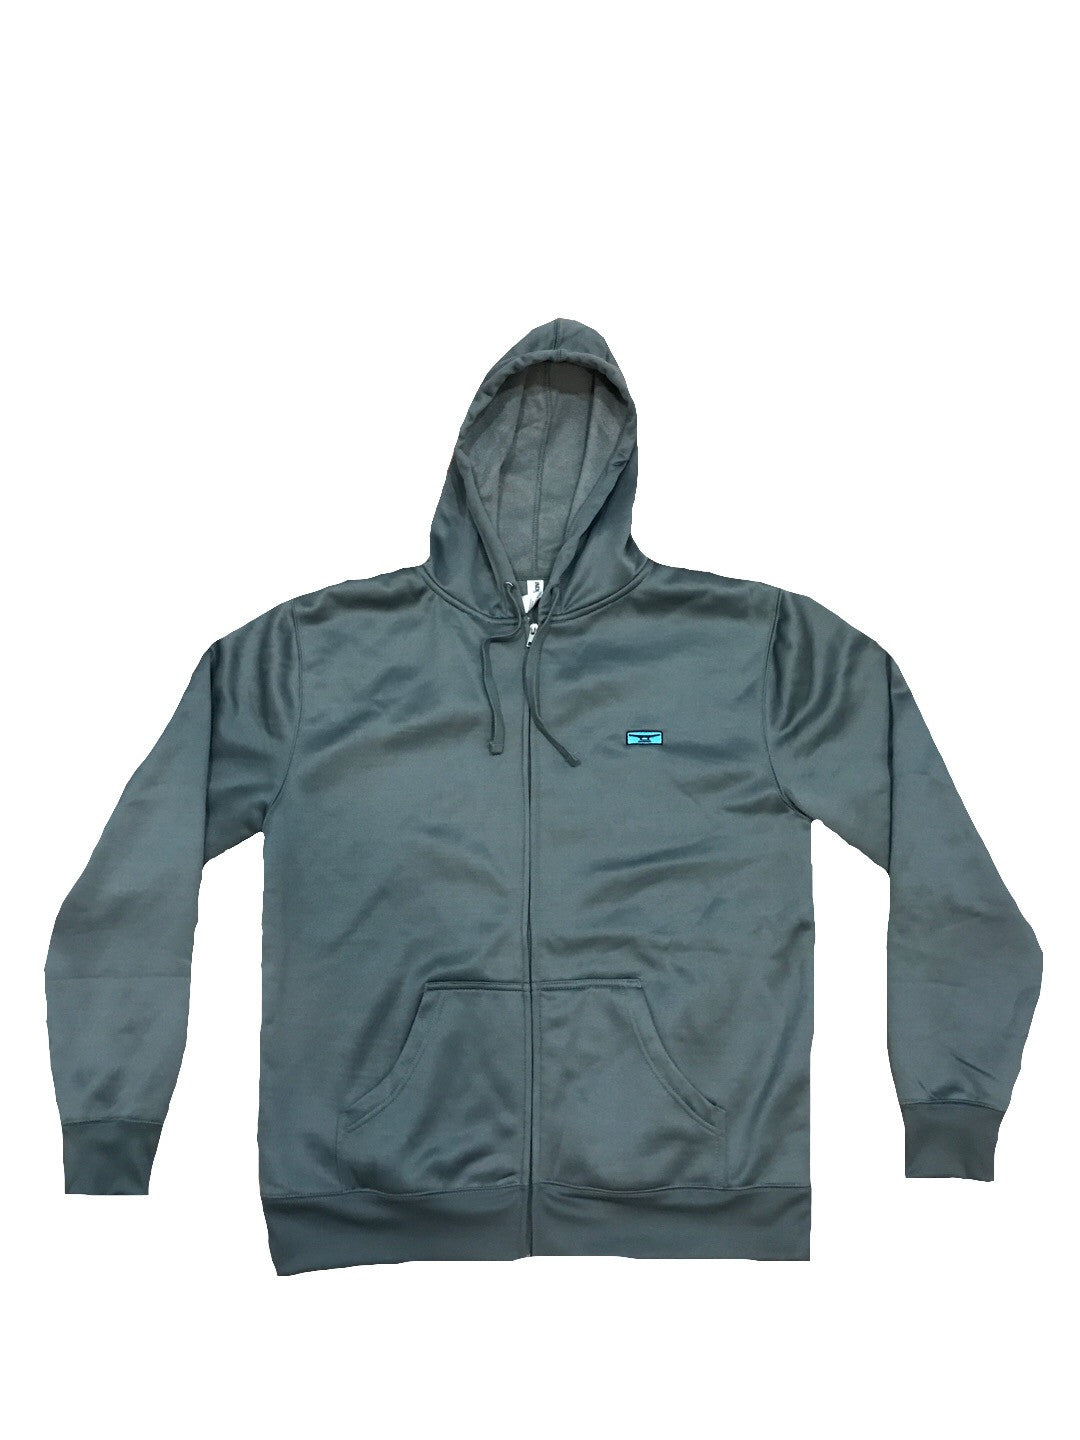 Kluch Mens Hoodies/Jackets - Kluch Apparel